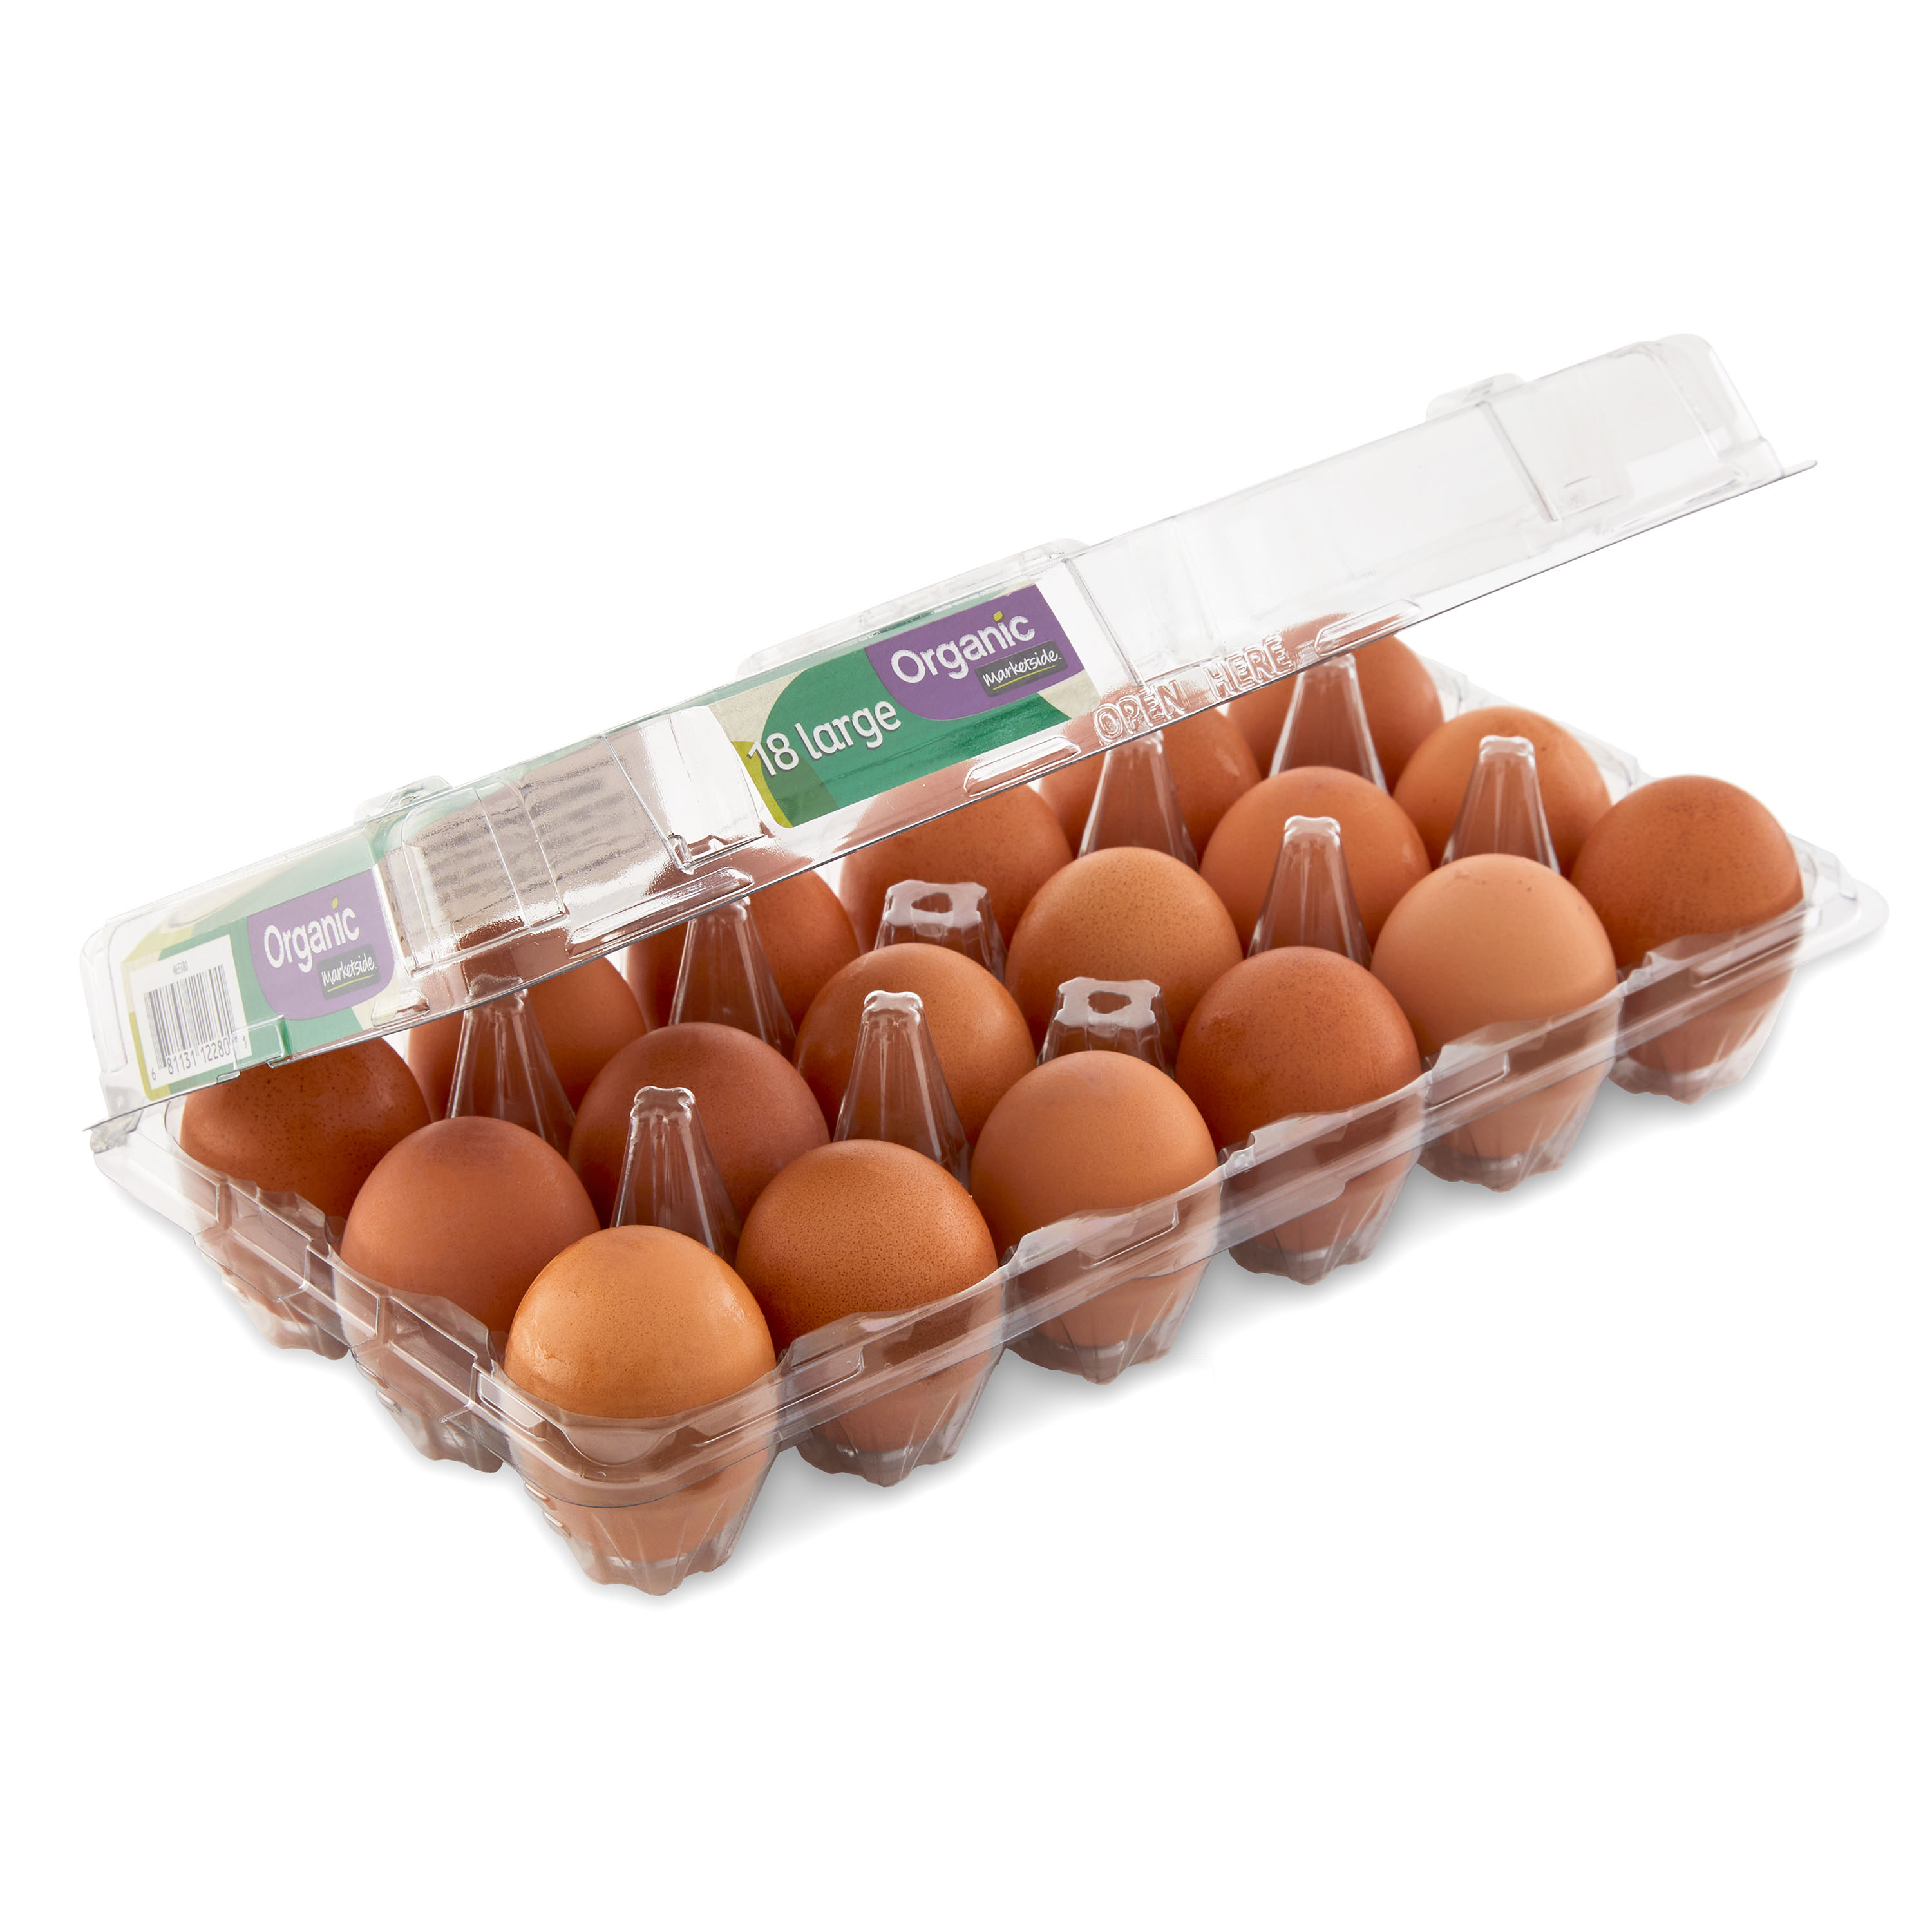 Marketside Organic Cage-Free Brown Large Eggs, 18 Count - image 3 of 6